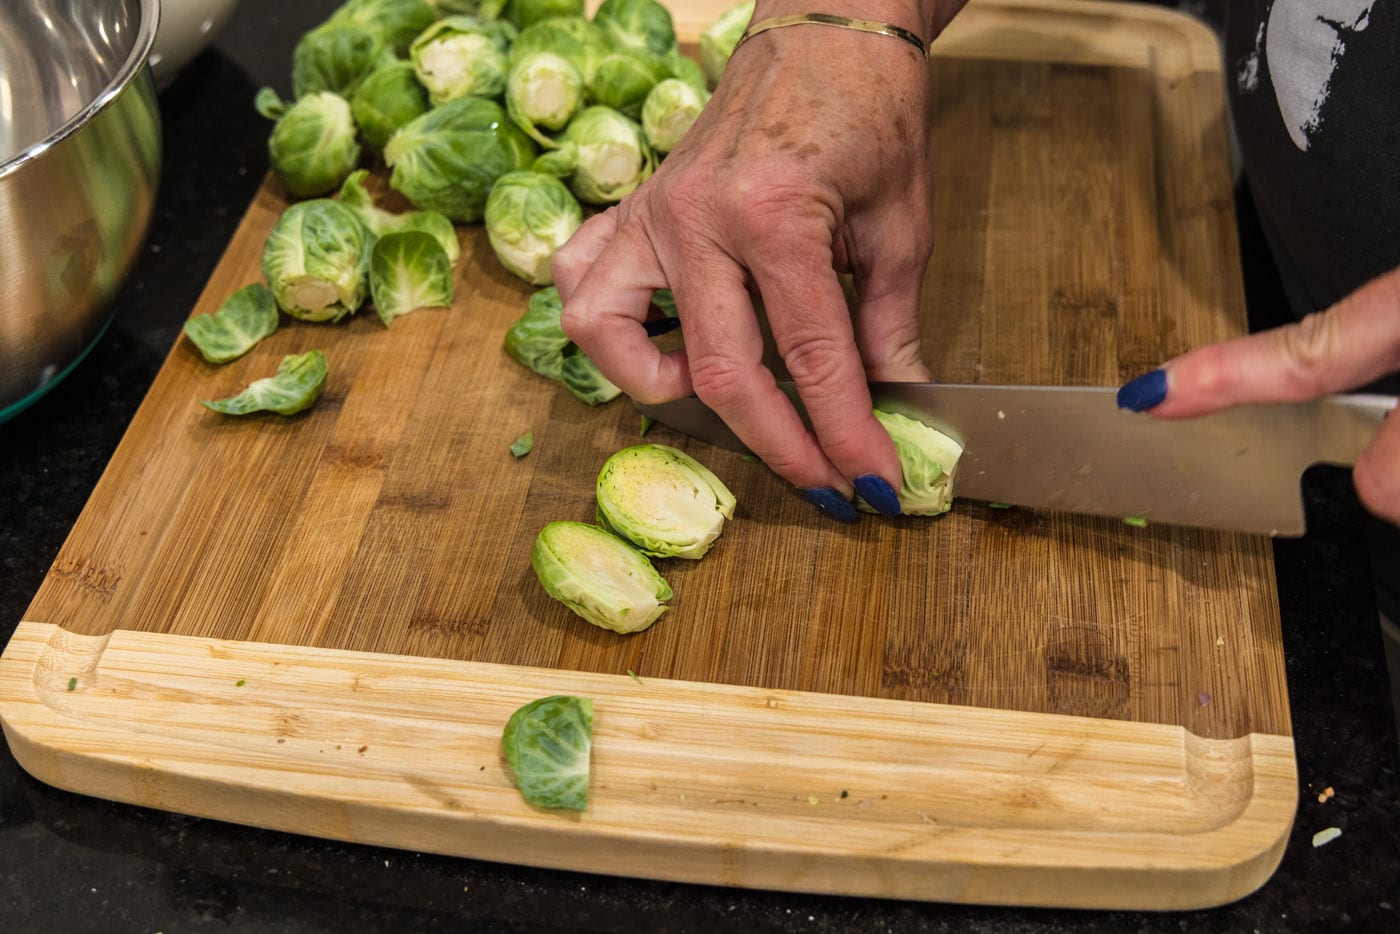 slicing brussels sprouts in half lengthwise